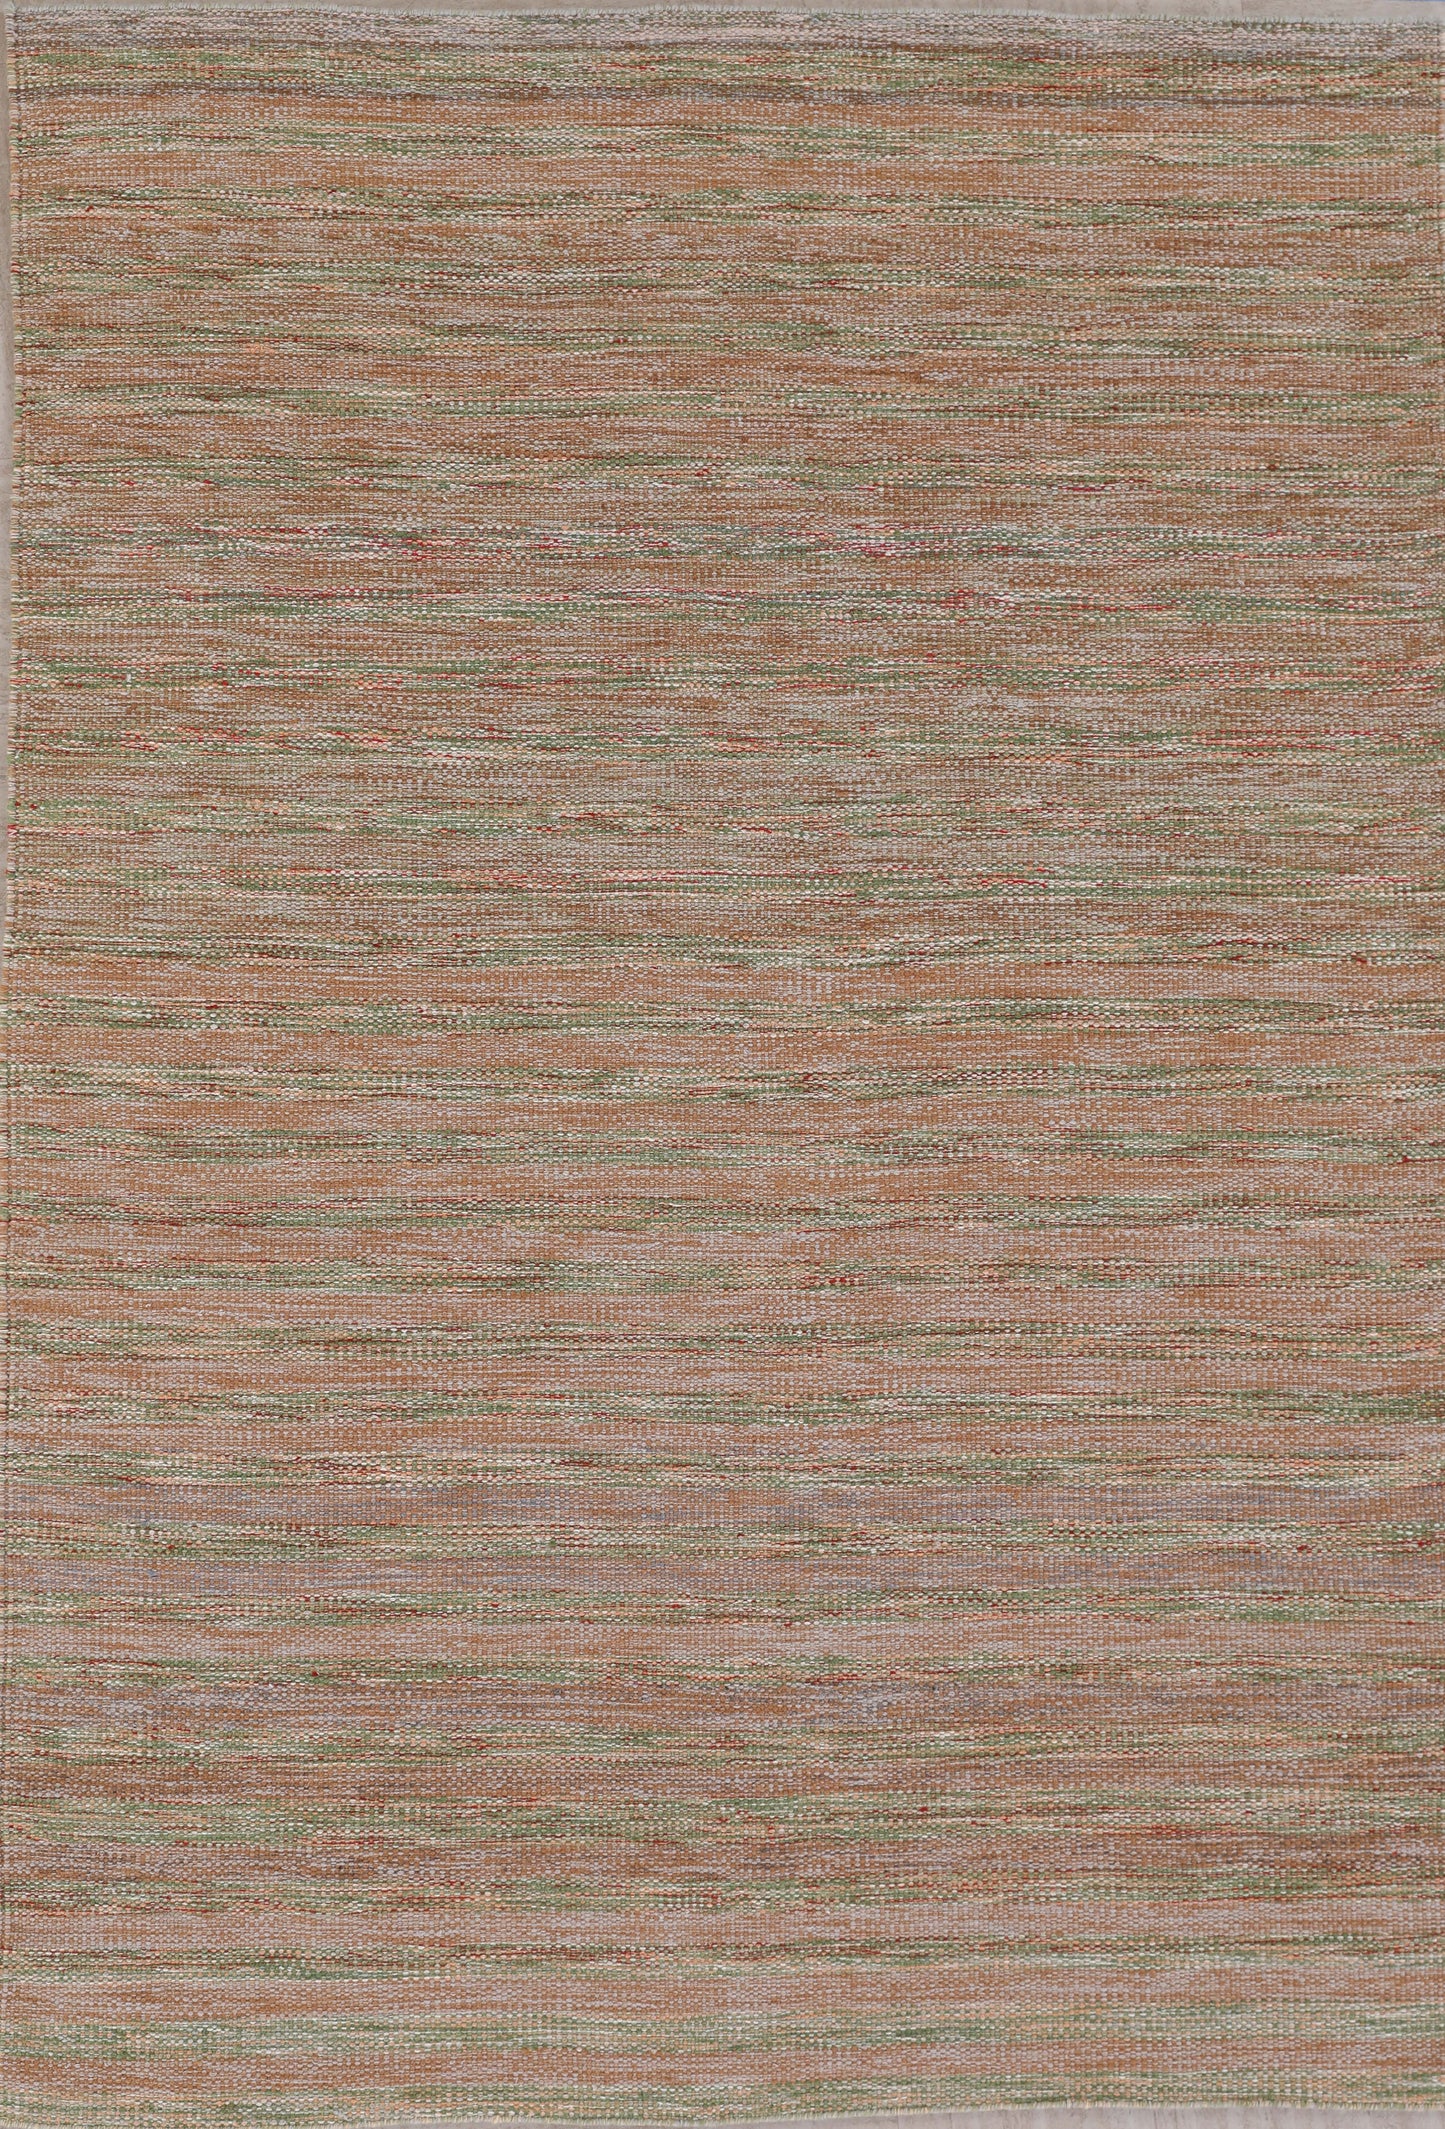 Kilim Modern Wool Multicolor Brown Green Red product image #27645847896234